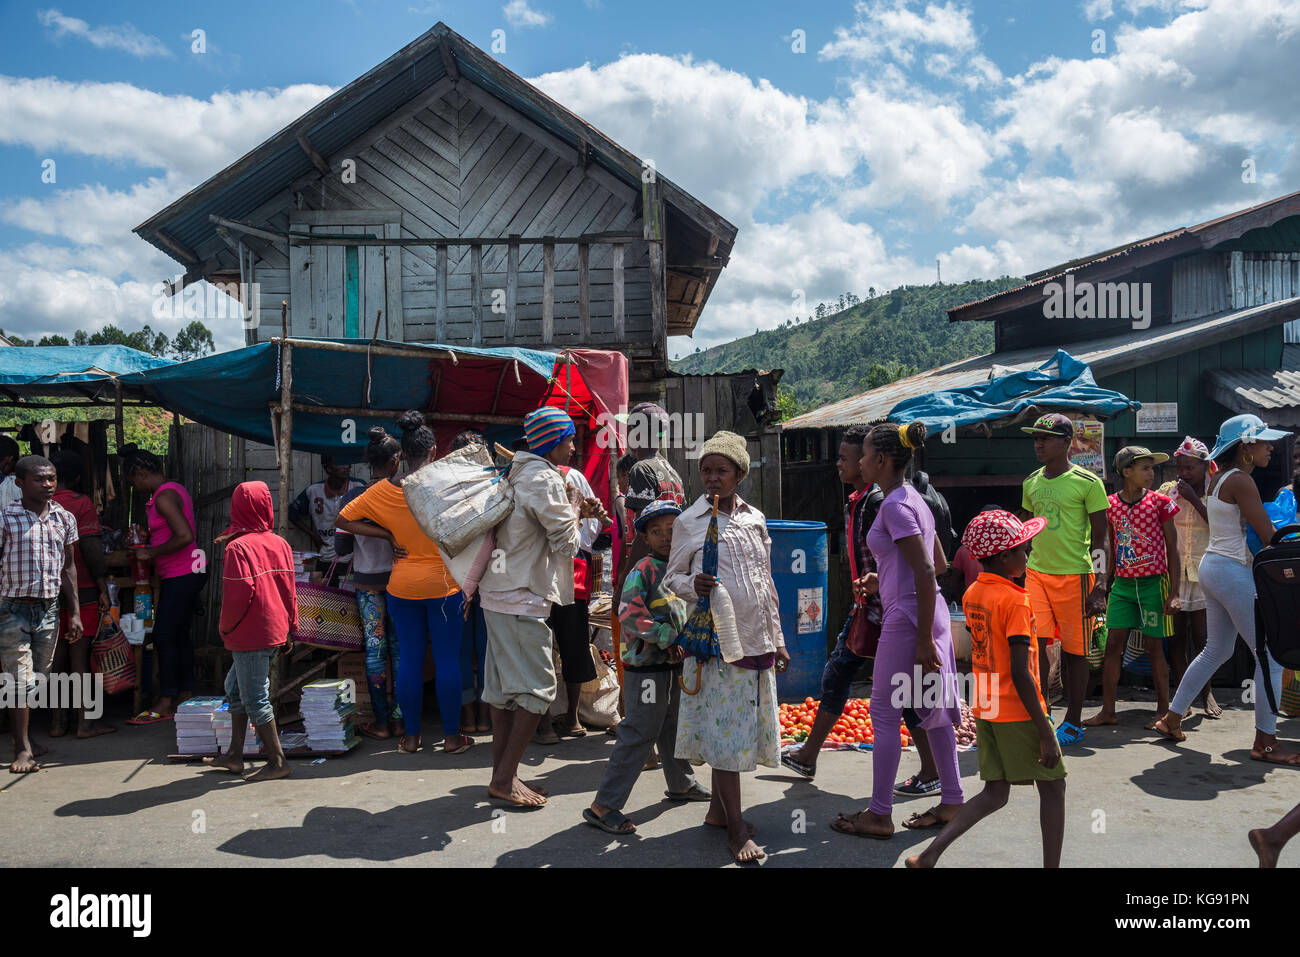 Malagasy people walk and shop at a street market. Madagascar, Africa. Stock Photo